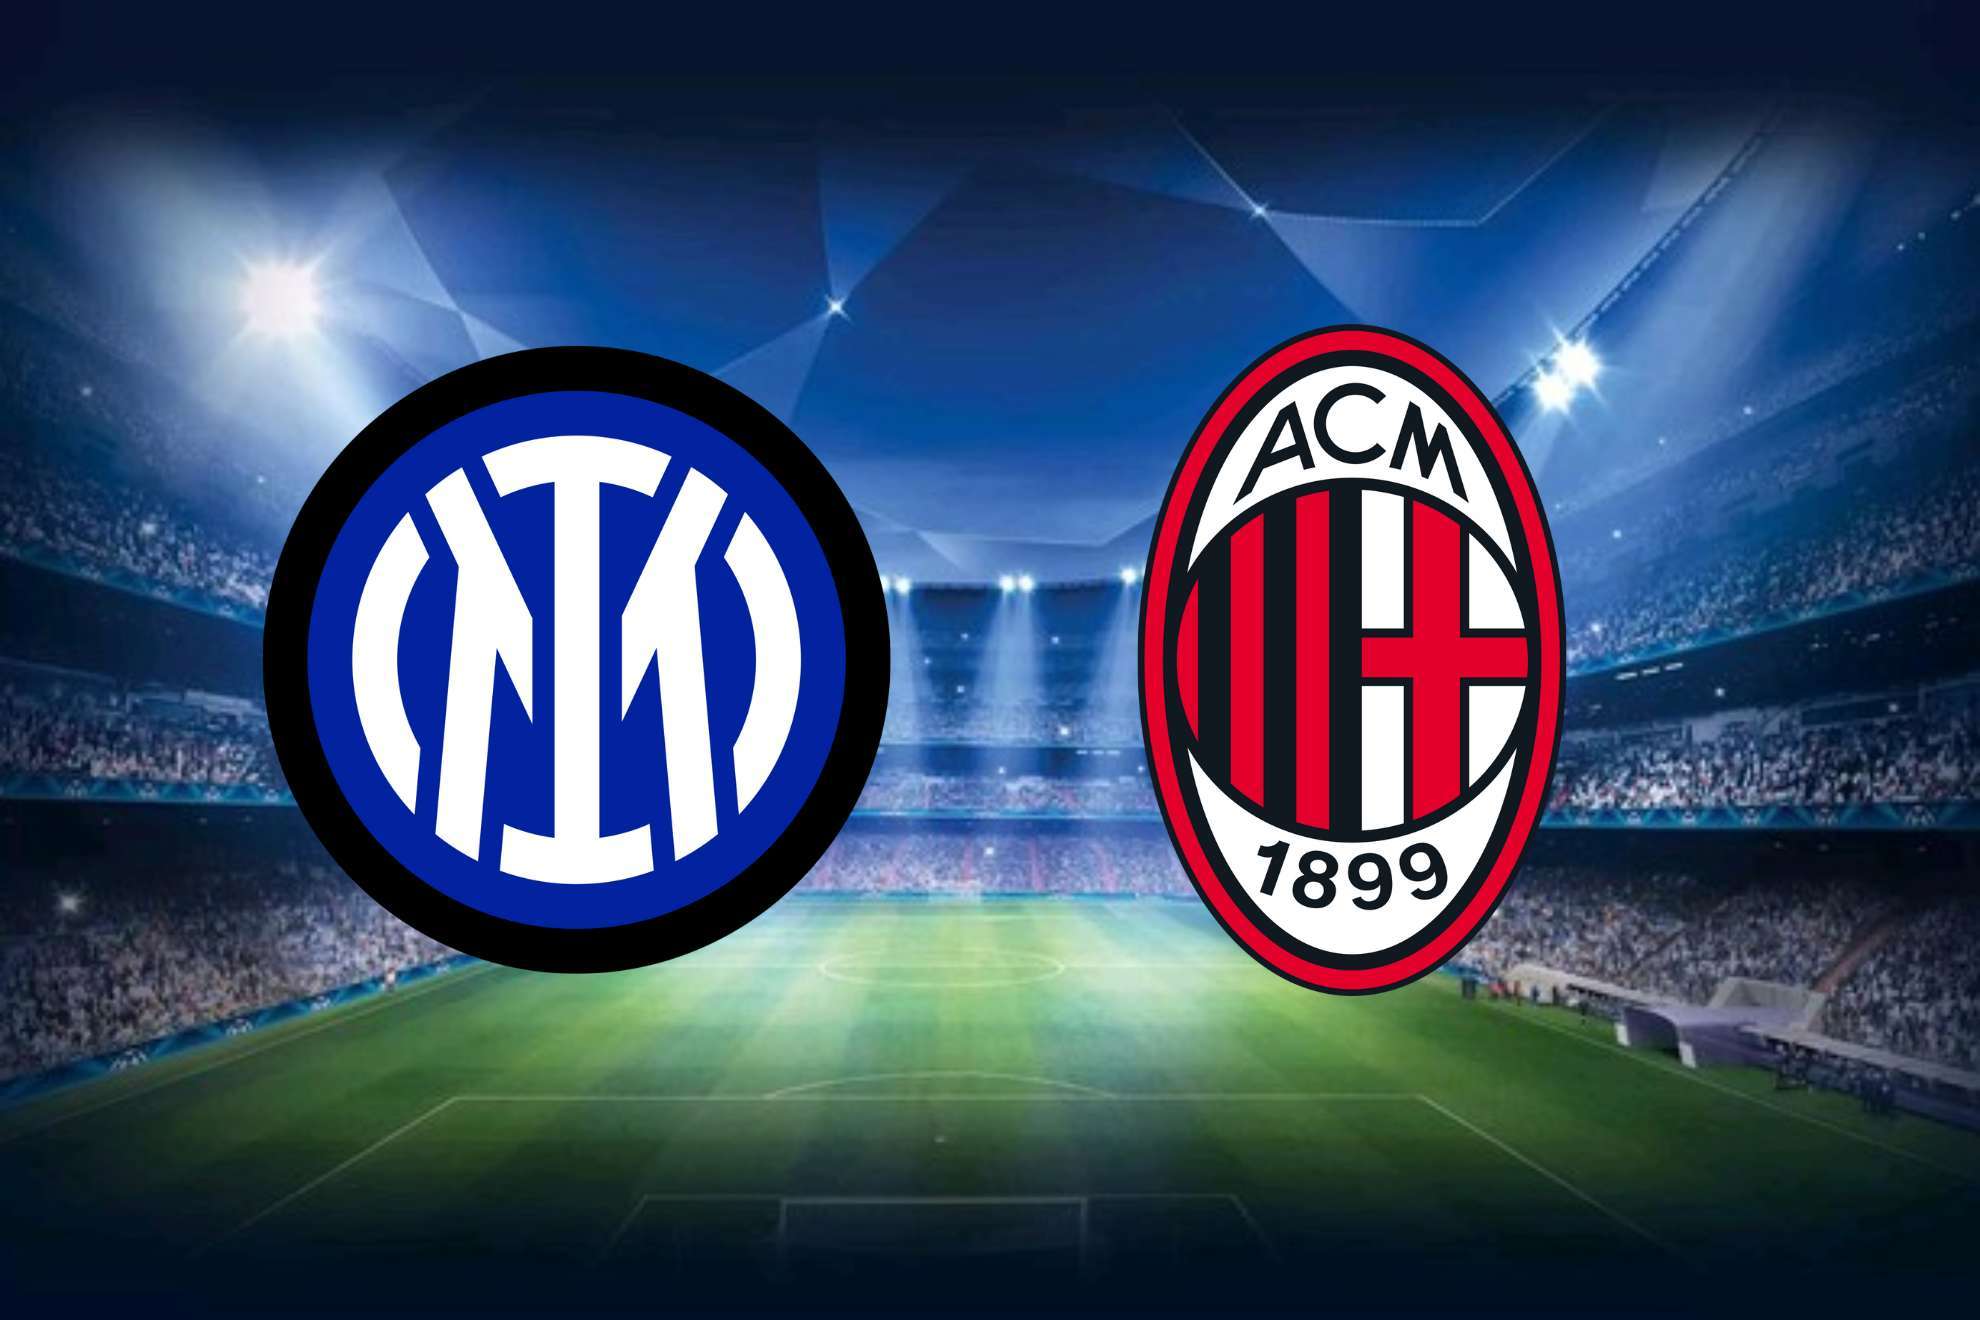 Champions League Semifinal Game 2: How to watch Inter Milan vs AC Milan in the US.